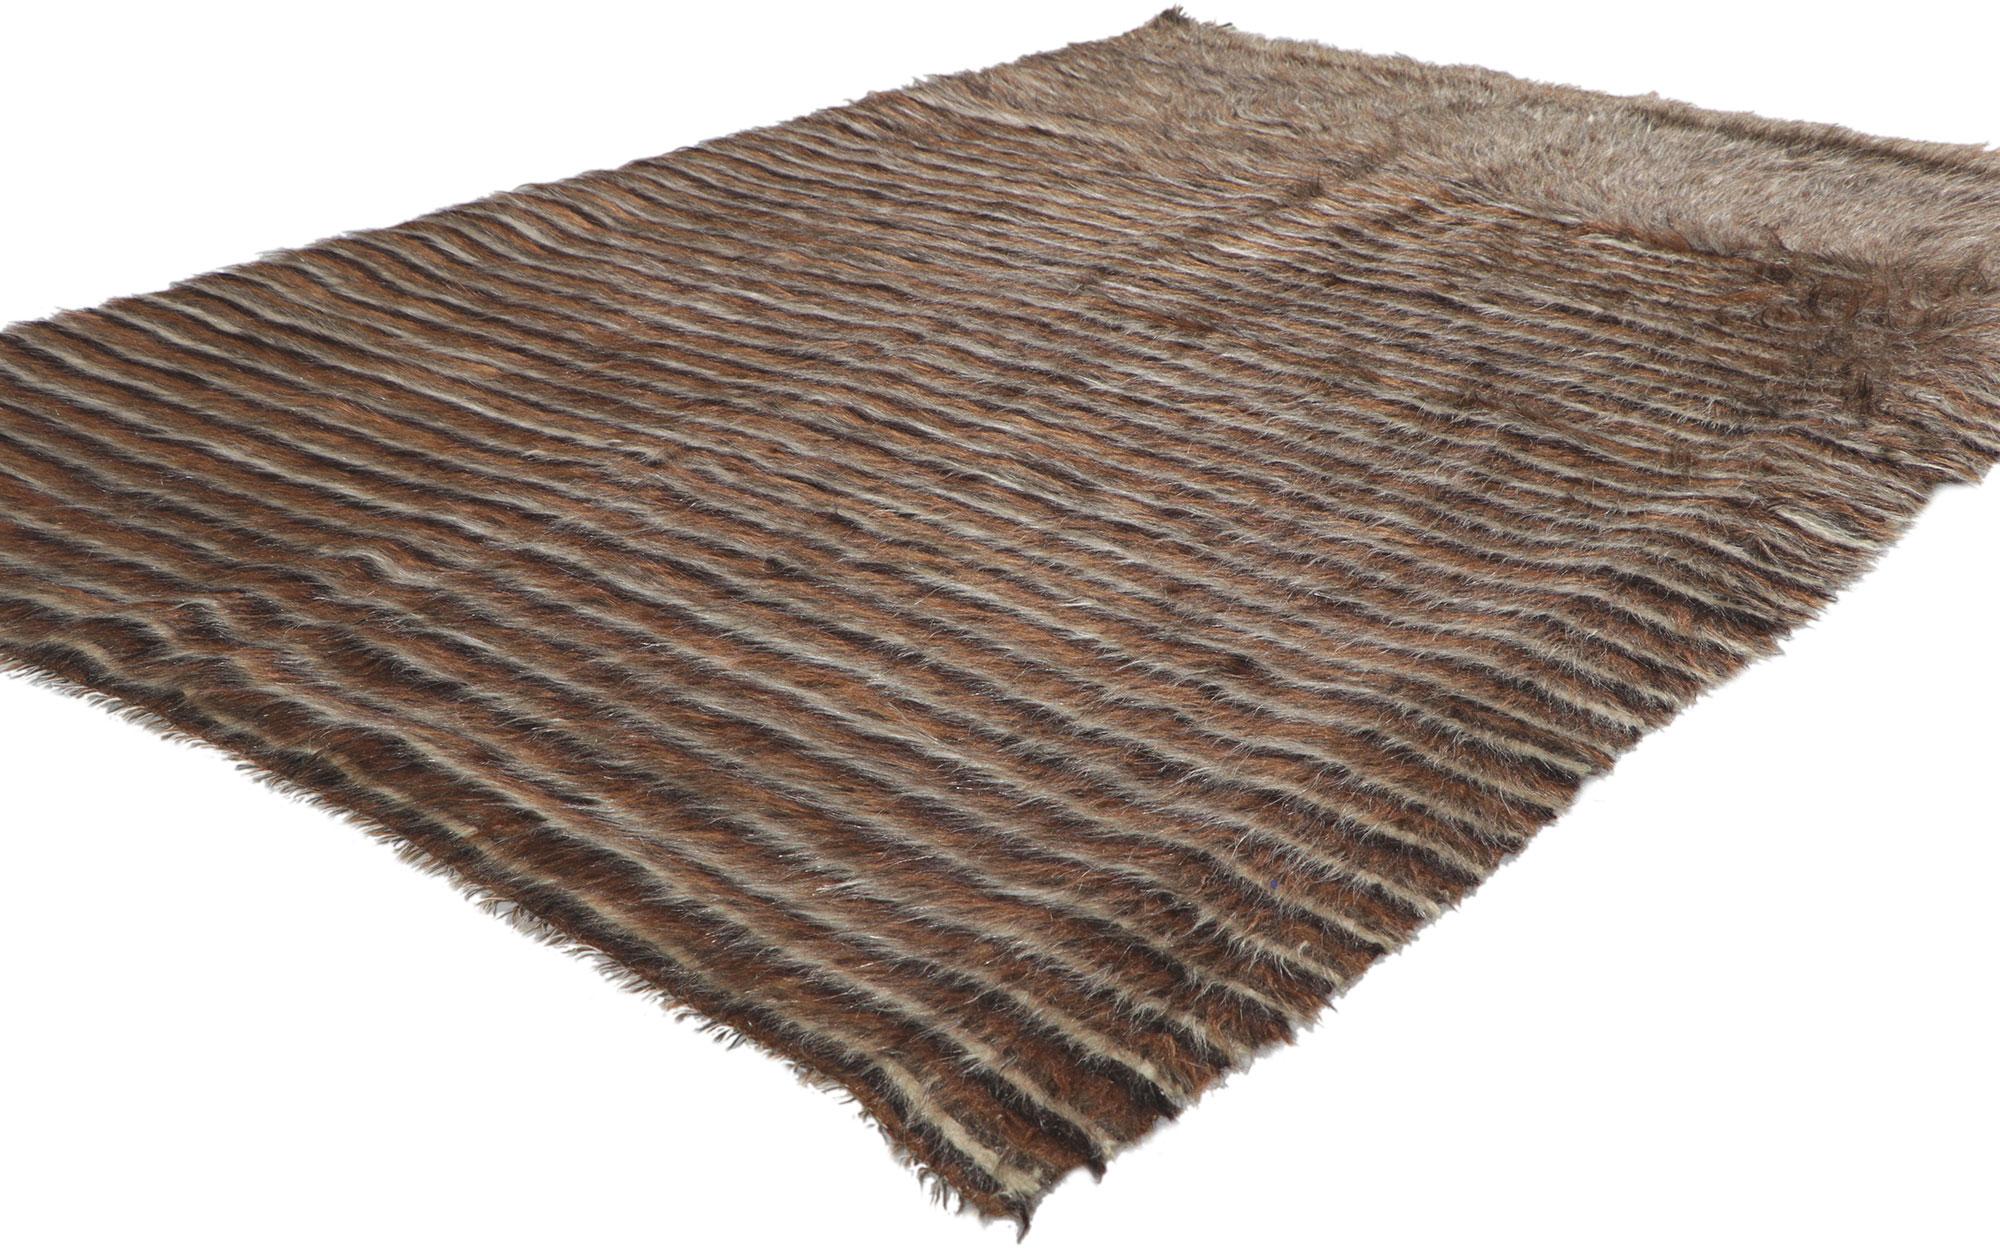 53844 Vintage Turkish Angora Wool Kilim Blanket Rug, 04'03 x 06'00. With its shaggy pile, incredible detail and texture, this handwoven Turkish angora kilim rug is a captivating vision of woven beauty. The eye-catching geometric design and earthy